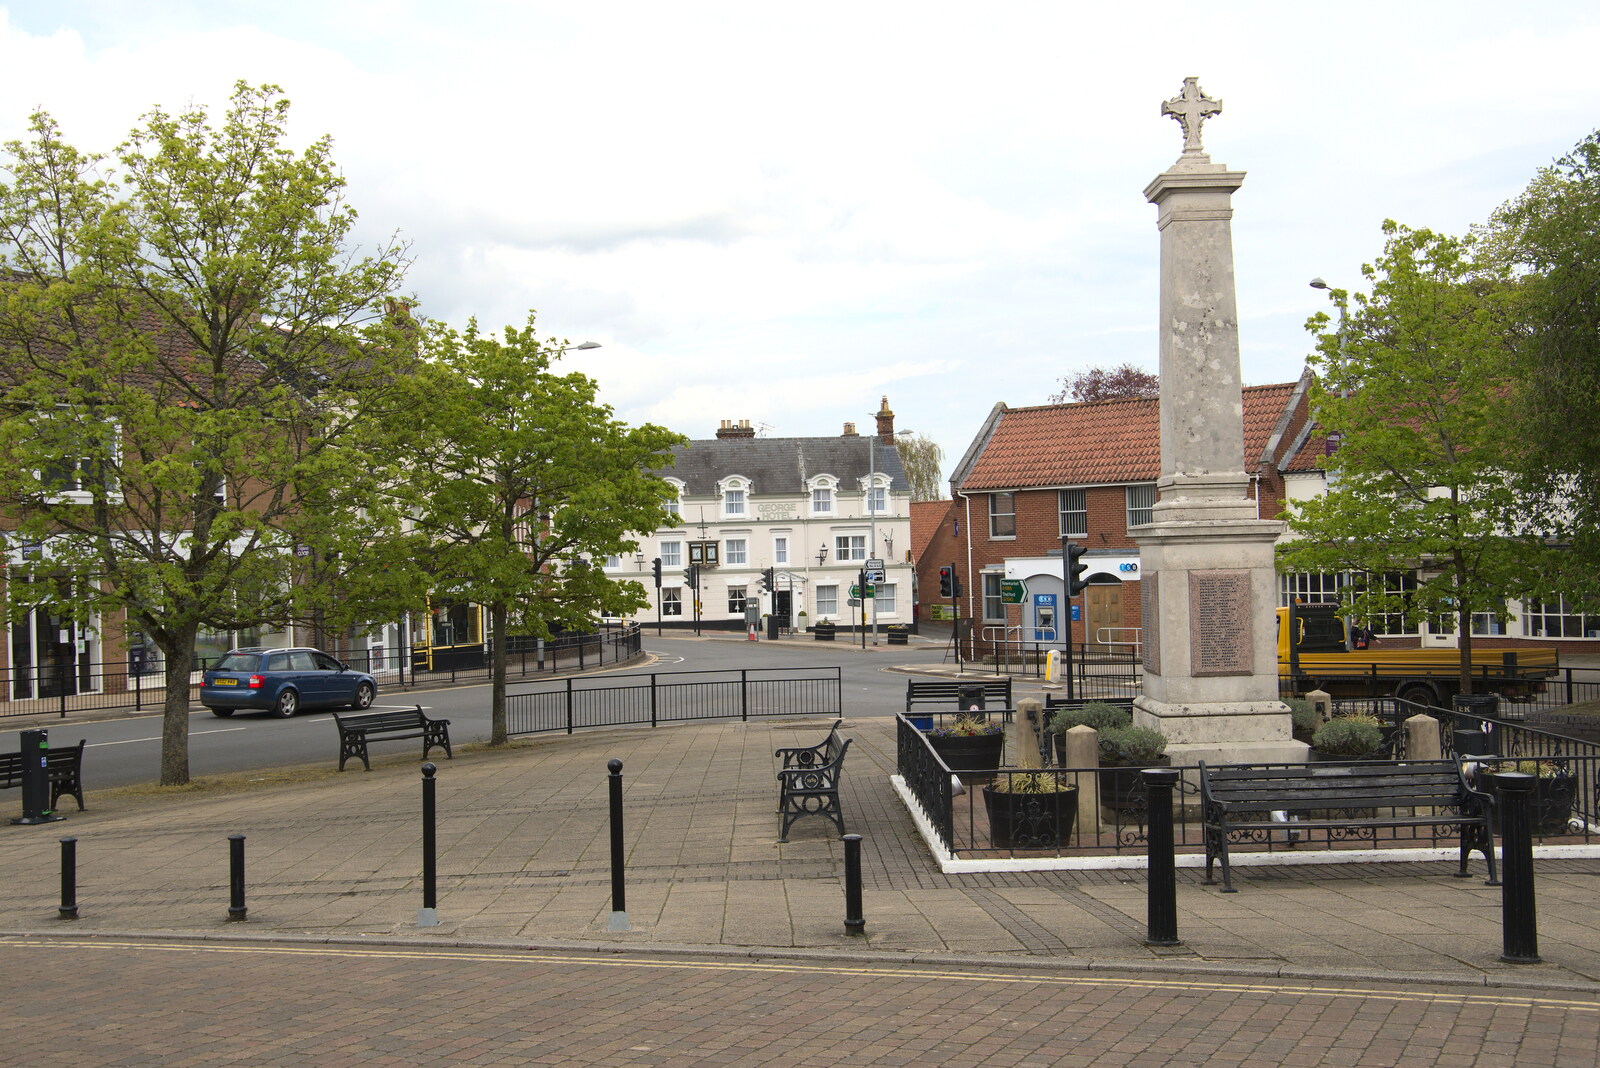 The Swaffham war memorial from A Vaccination Afternoon, Swaffham, Norfolk - 9th May 2021